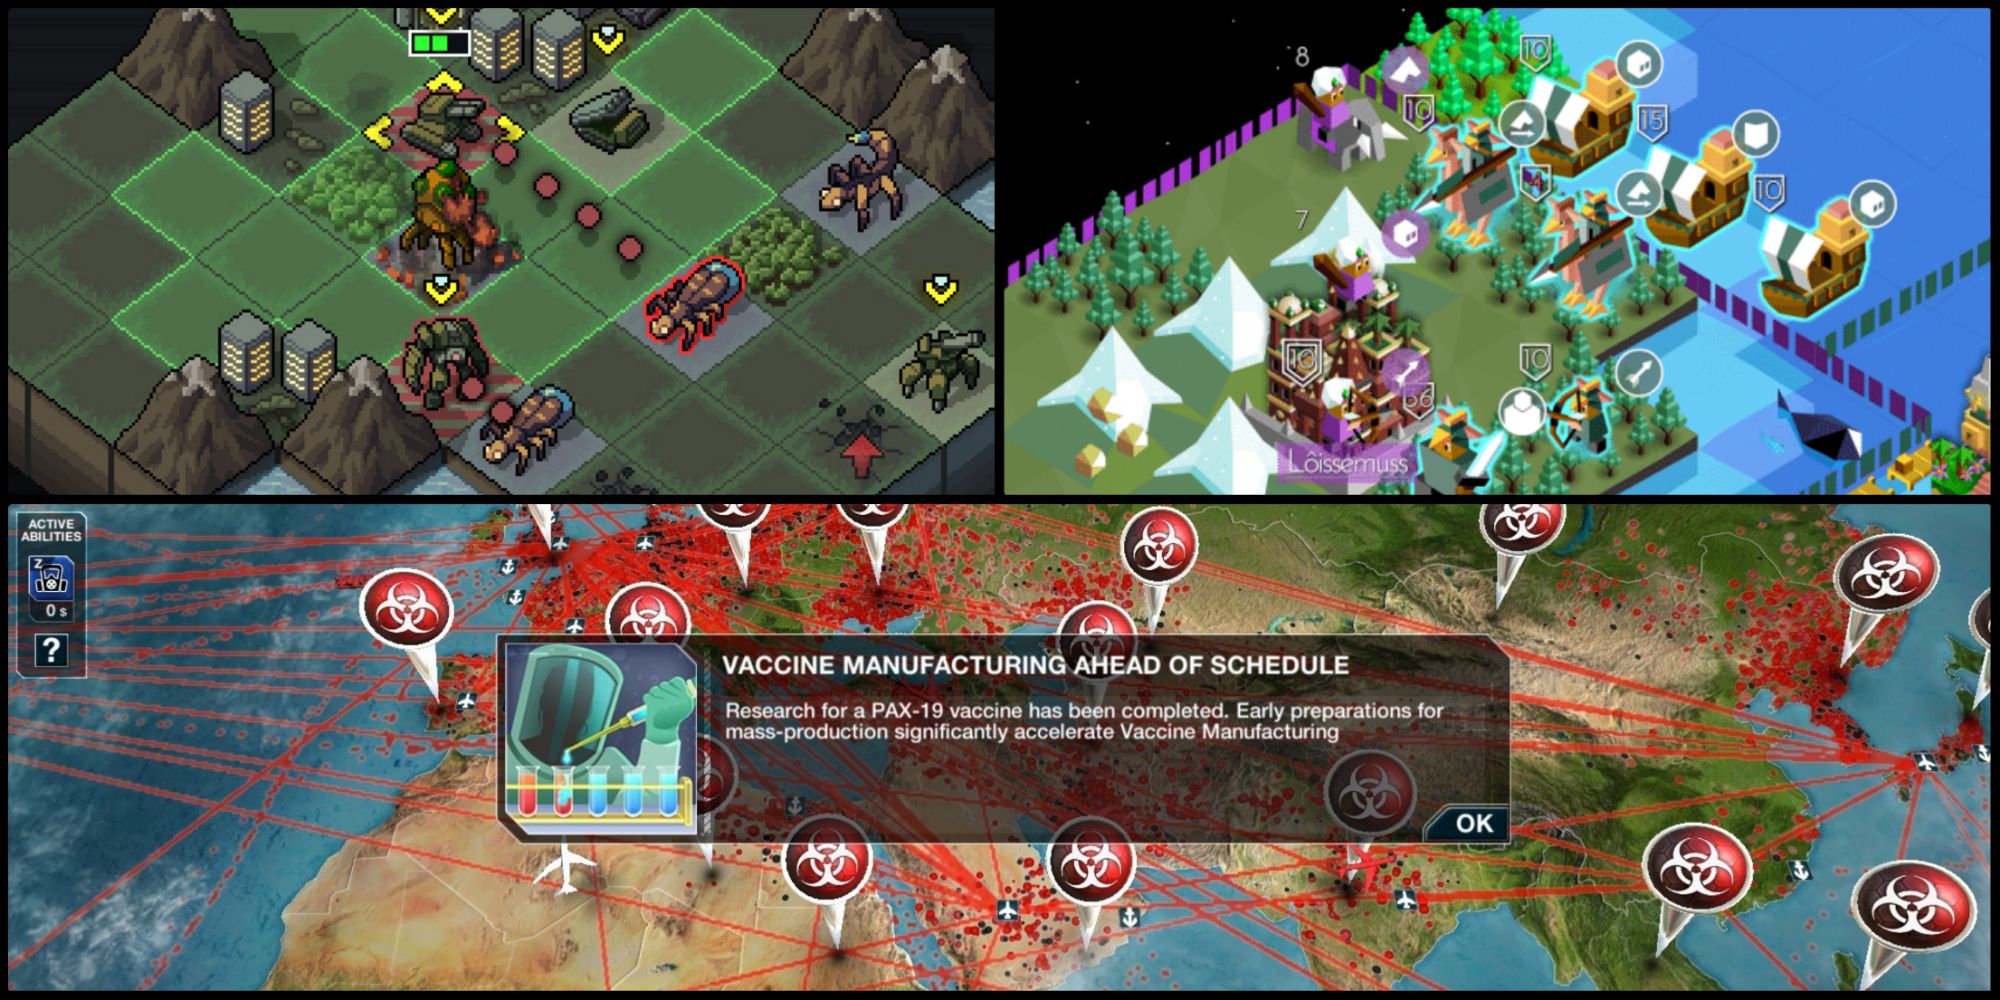 3 screens from into the breach, battle for polytopia and Plague inc